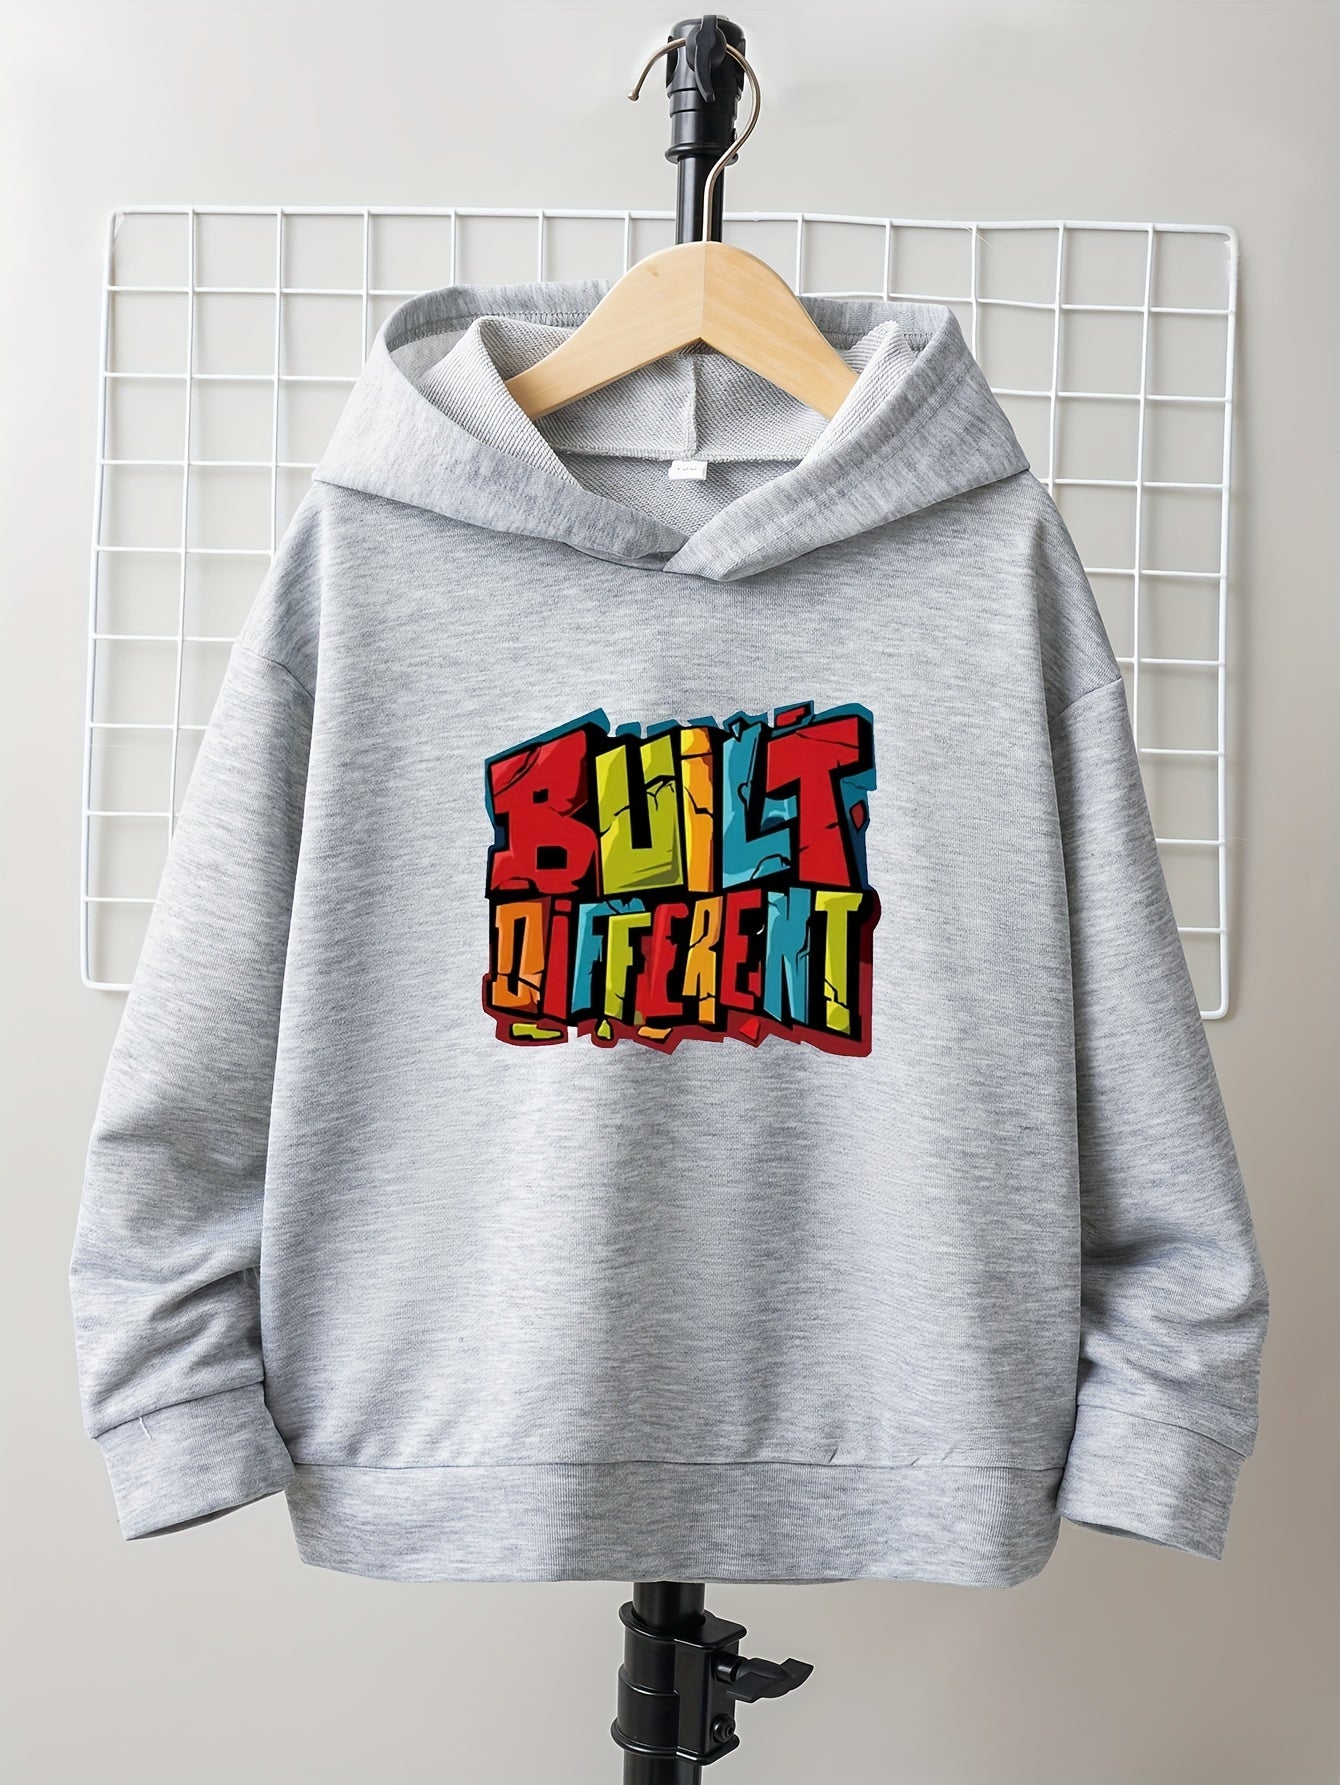 BUILT DIFFERENT Youth Christian Pullover Hooded Sweatshirt claimedbygoddesigns